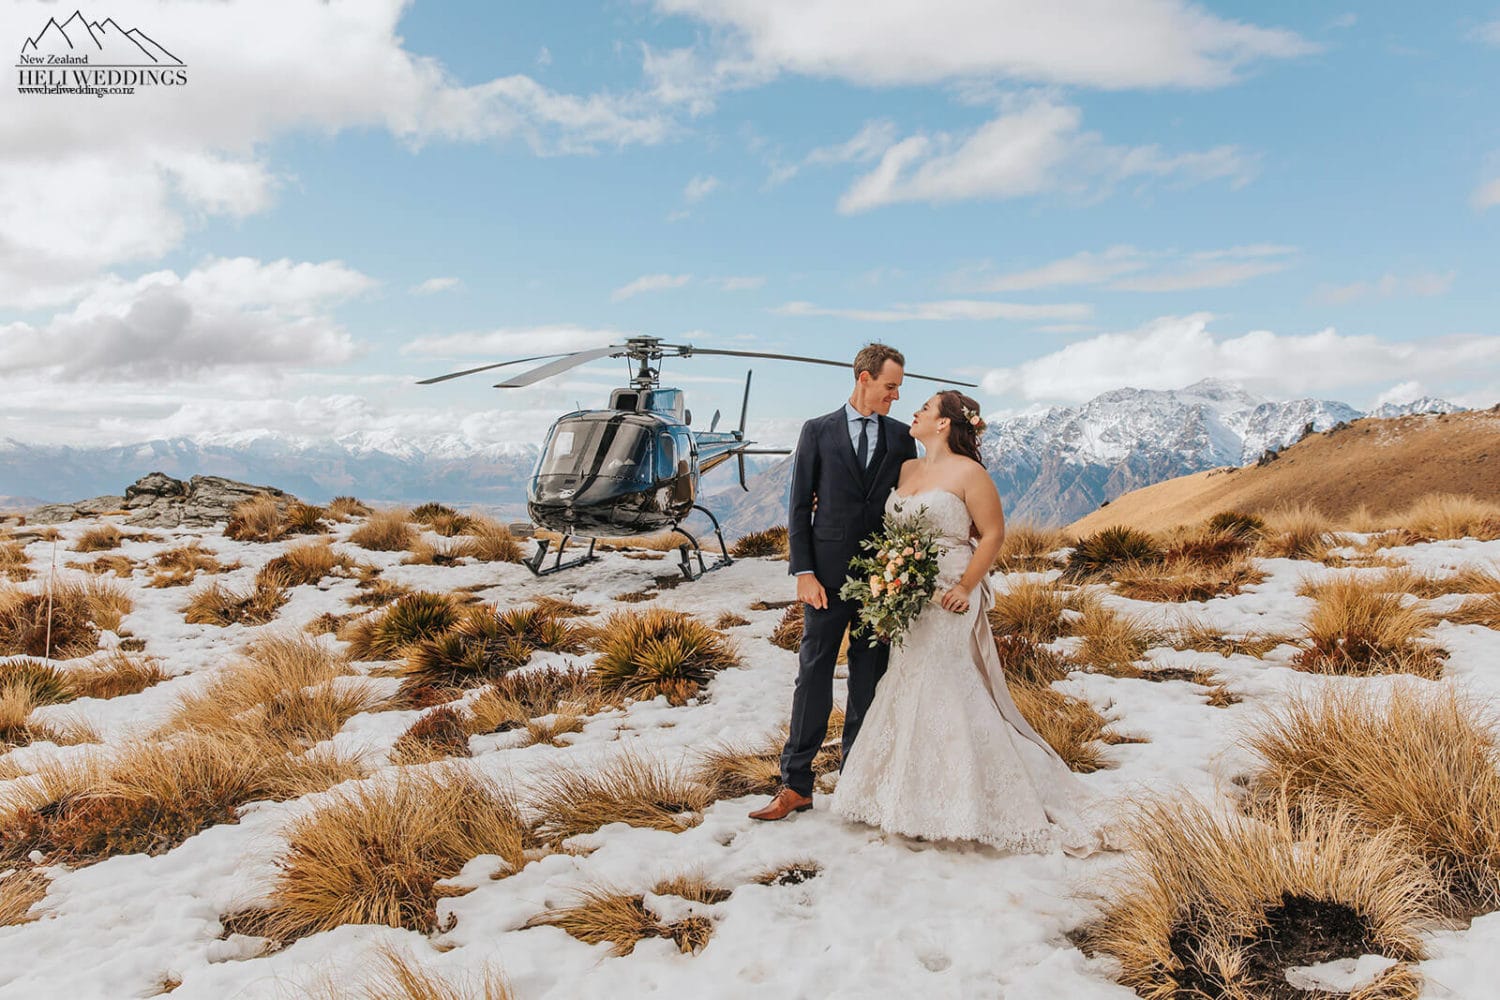 Mountain Weddings NZ with helicopter